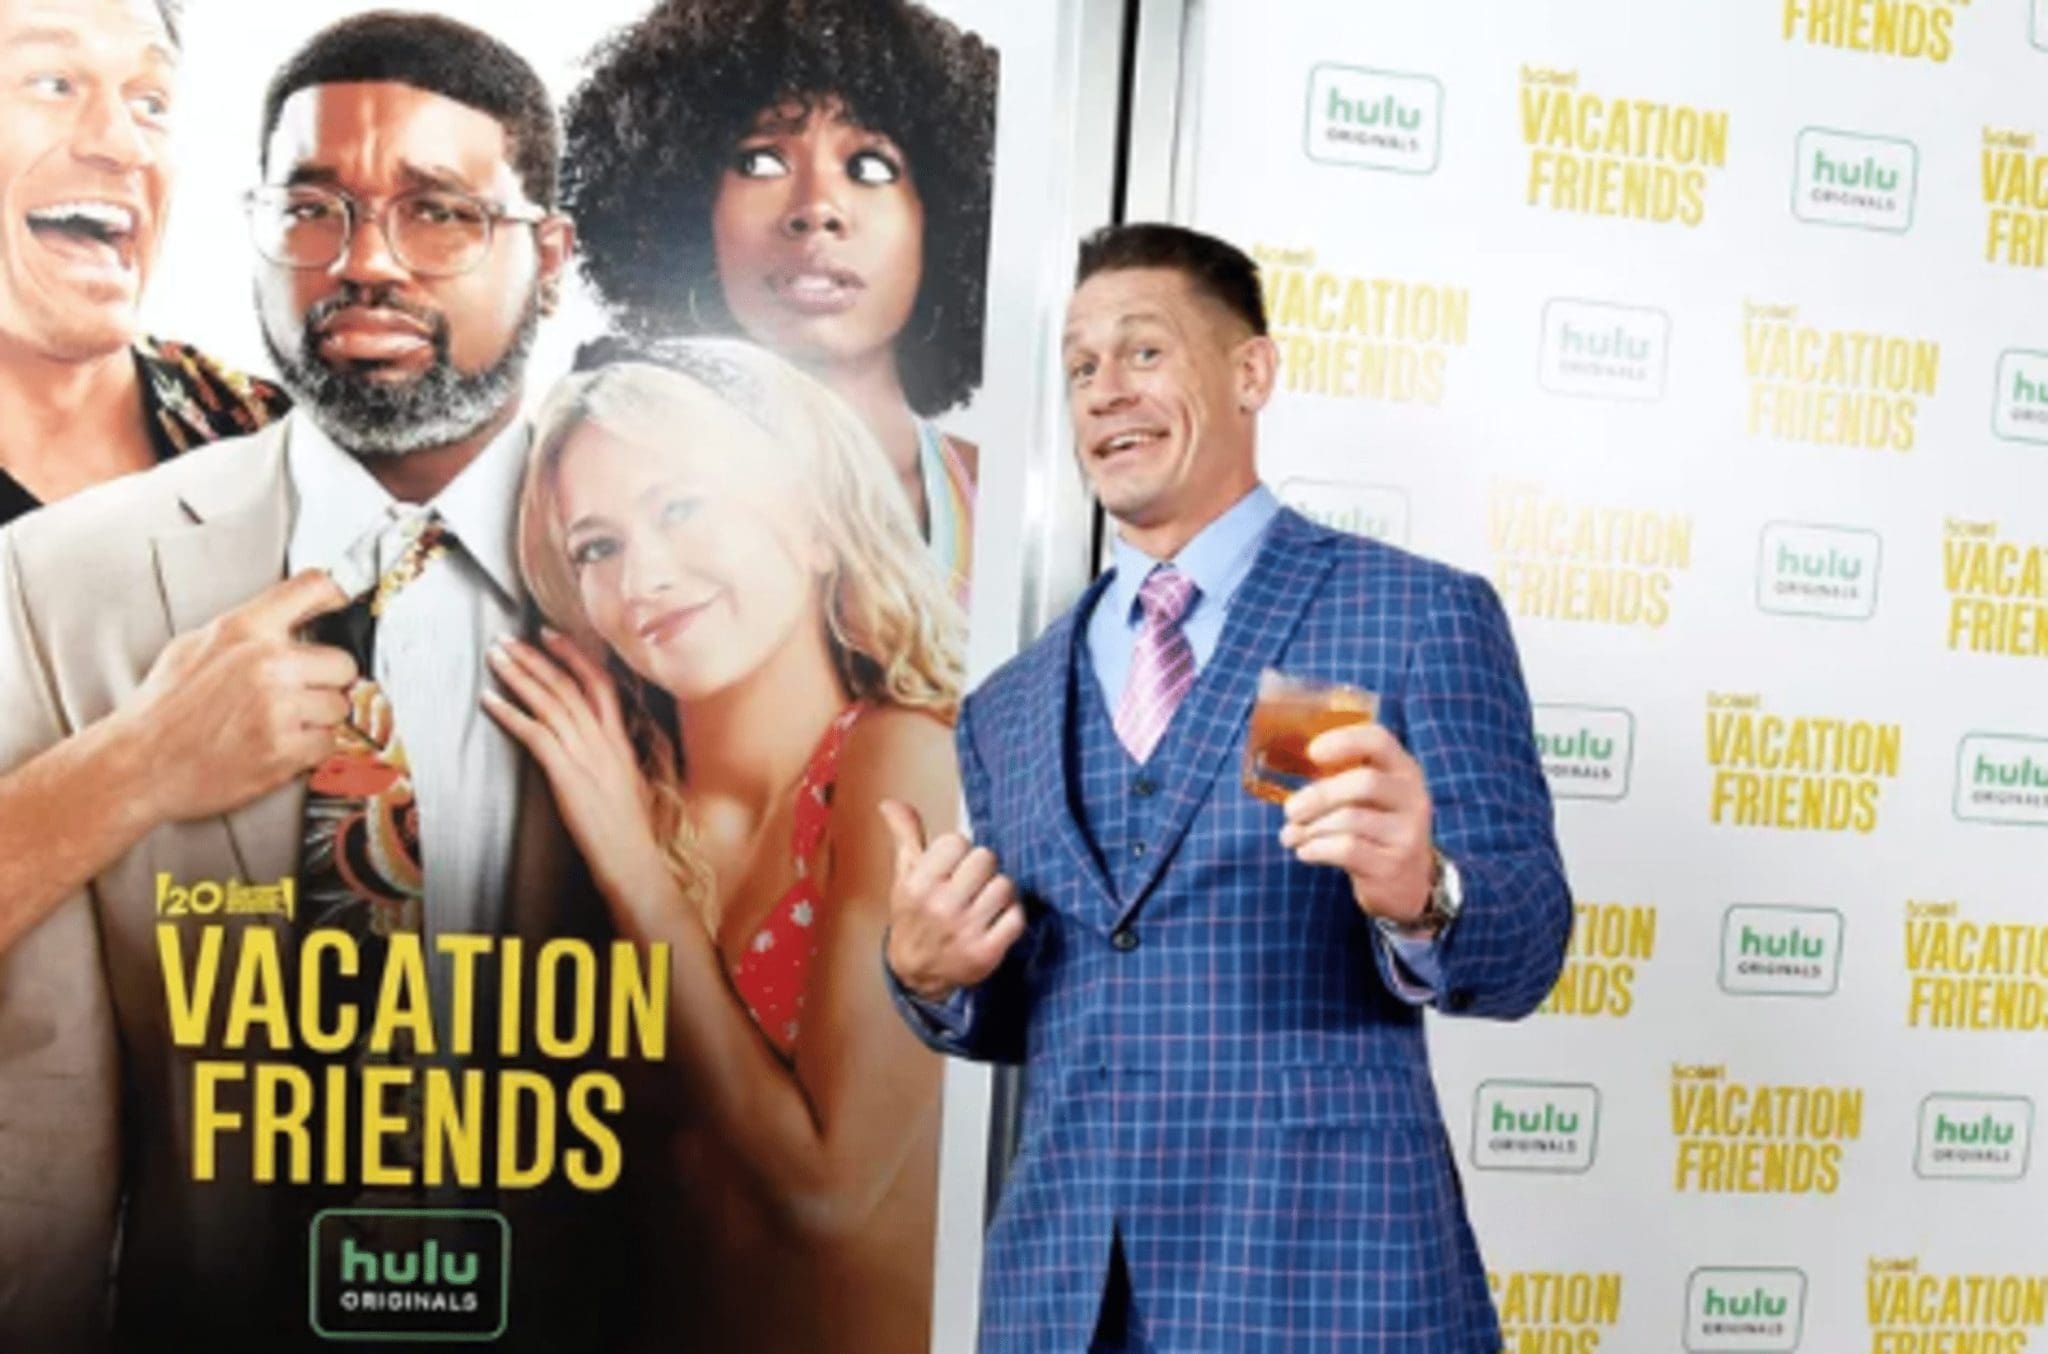 Among the organization's celebrity wish granters, John Cena is the most desired